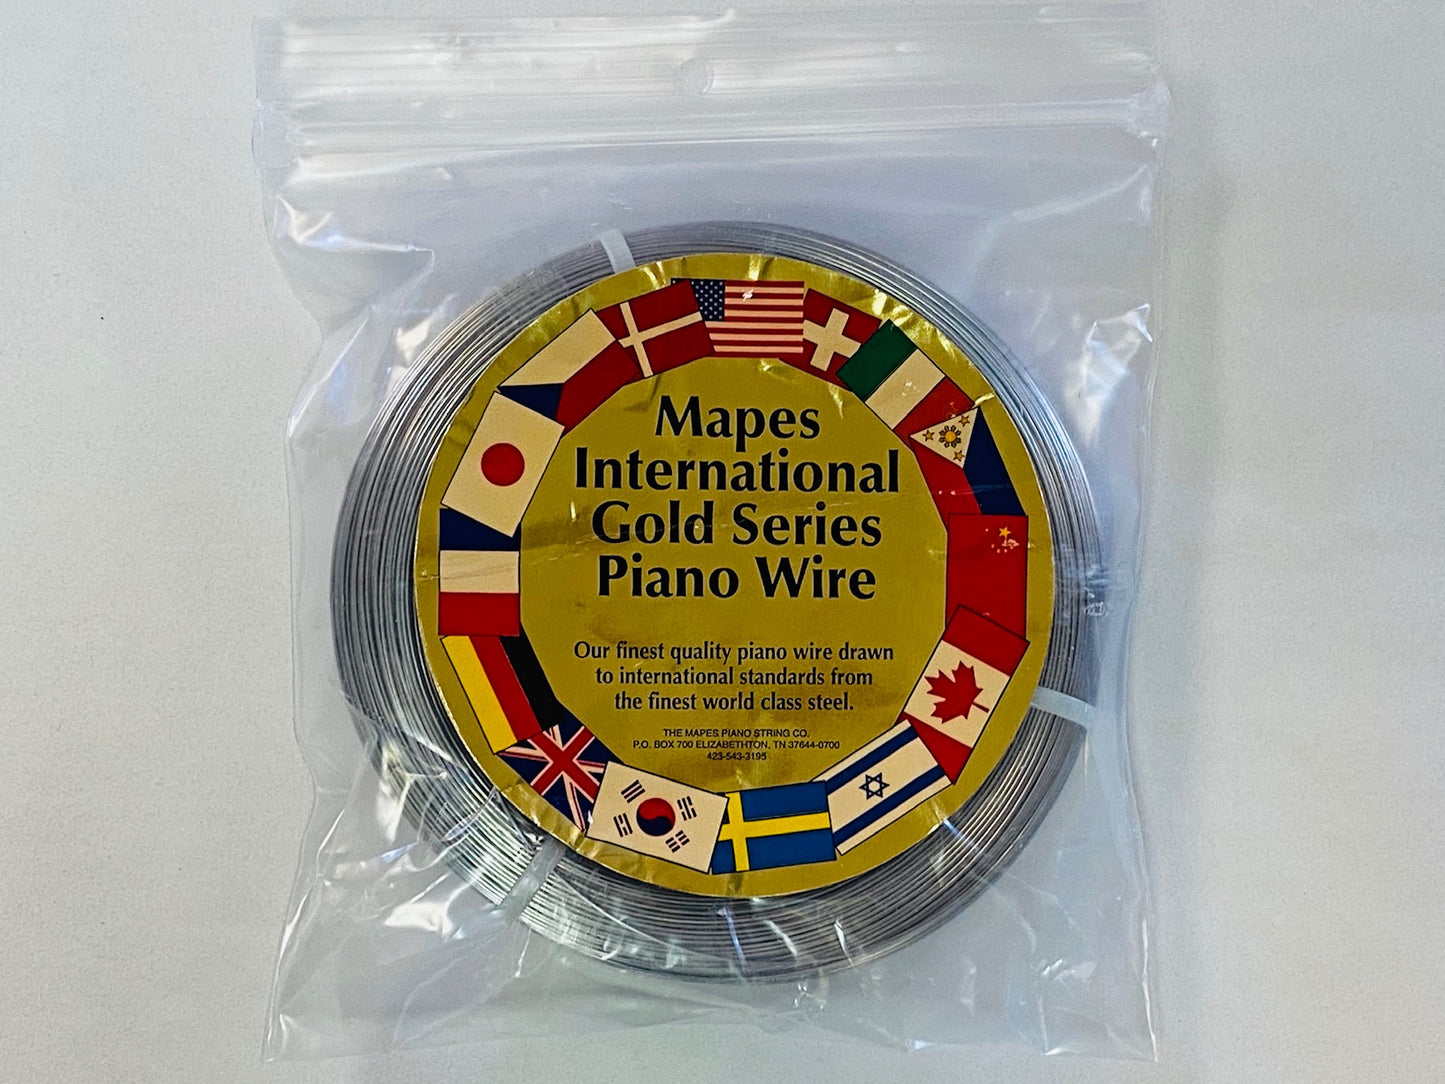 Mapes International Gold wire (1-pound coils)